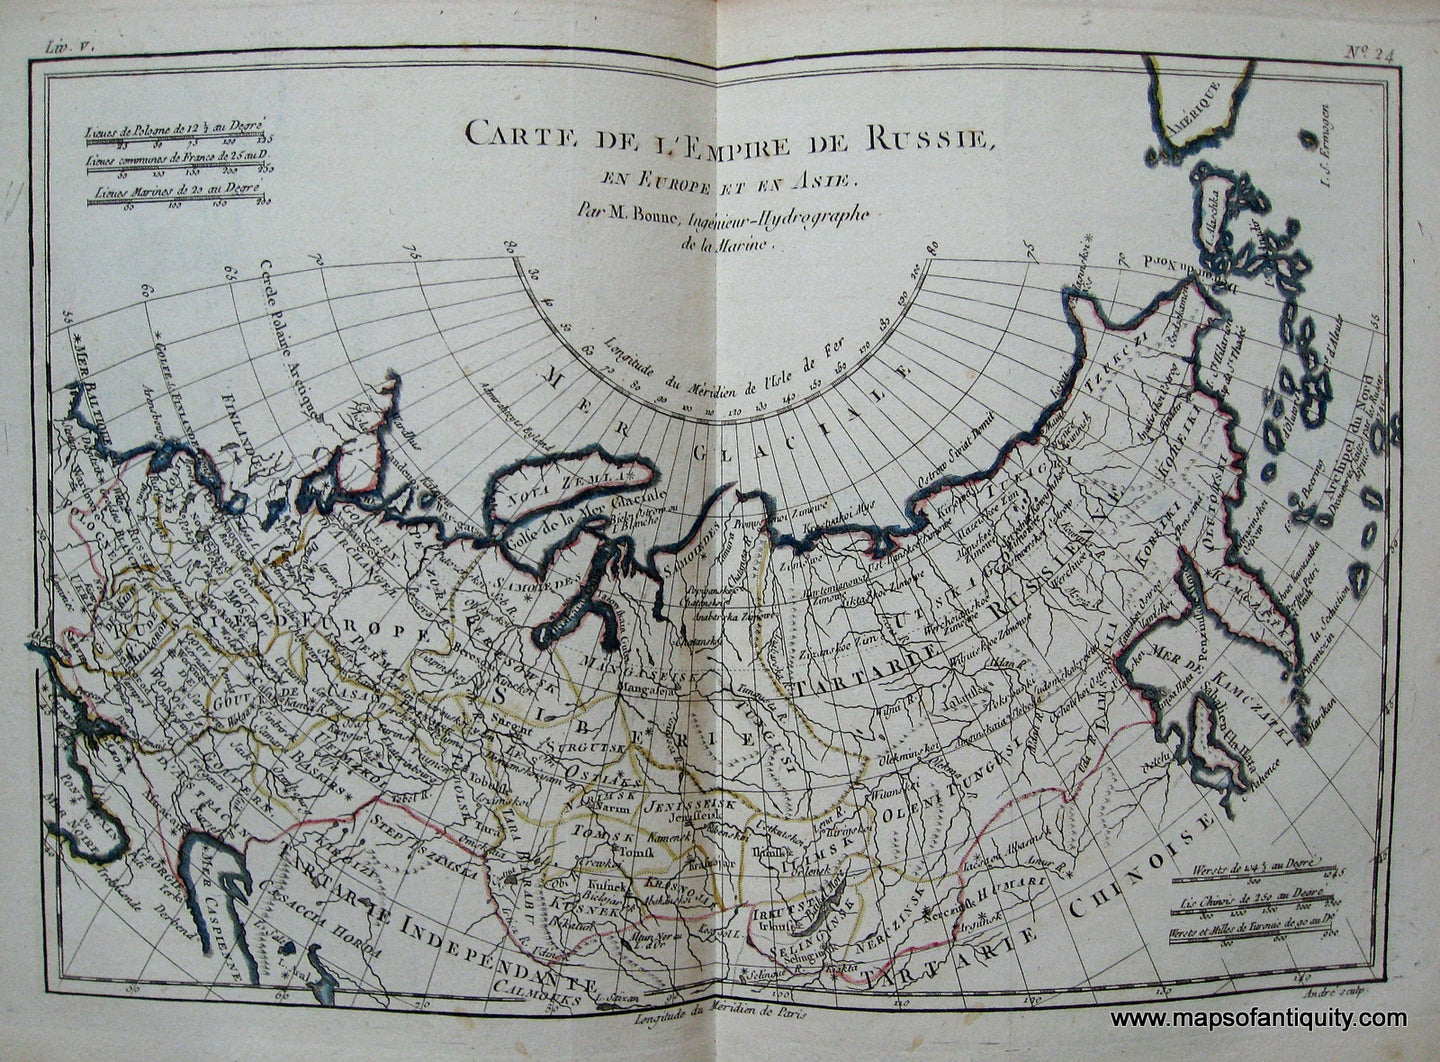 Antique-Hand-Colored-Map-L'Empire-de-Russie-en-Europe-et-en-Asie.-Europe-Russia-1780-Raynal-and-Bonne-Maps-Of-Antiquity